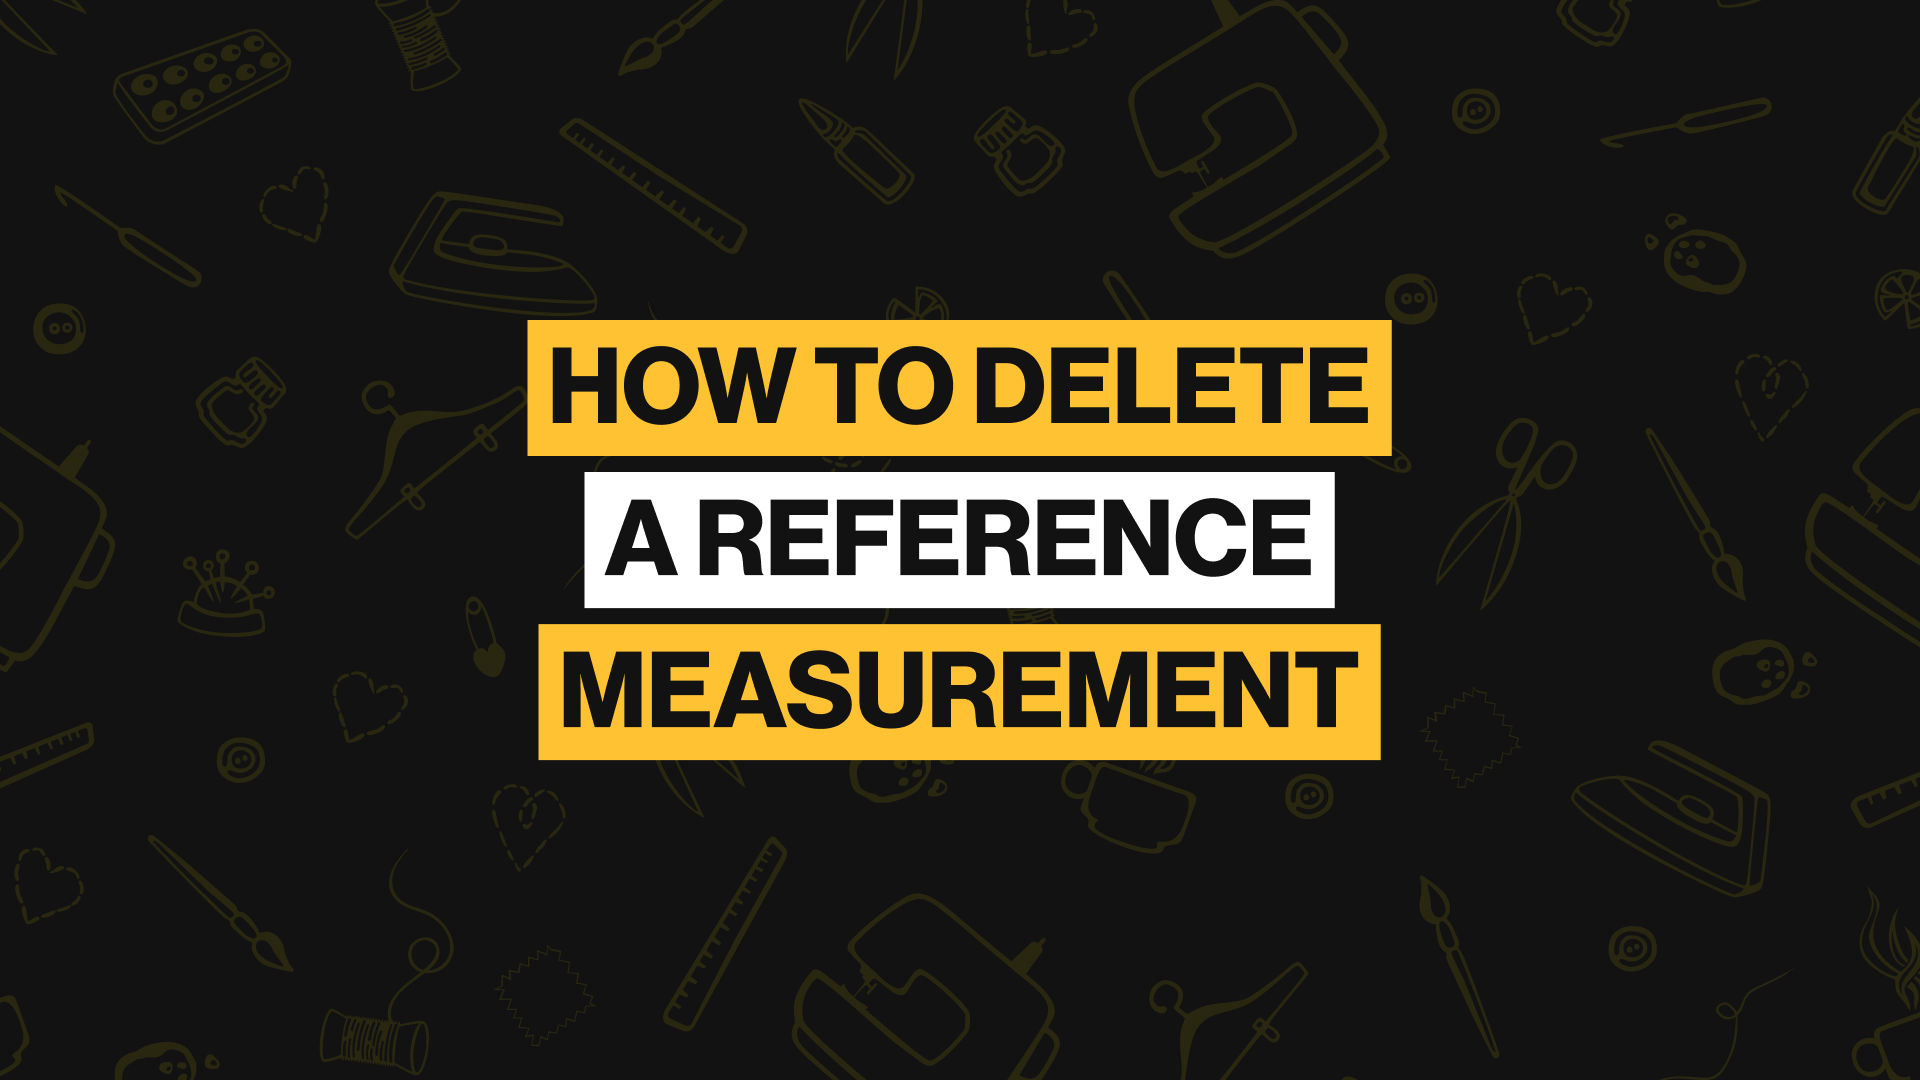 How to Delete A Reference Measurement